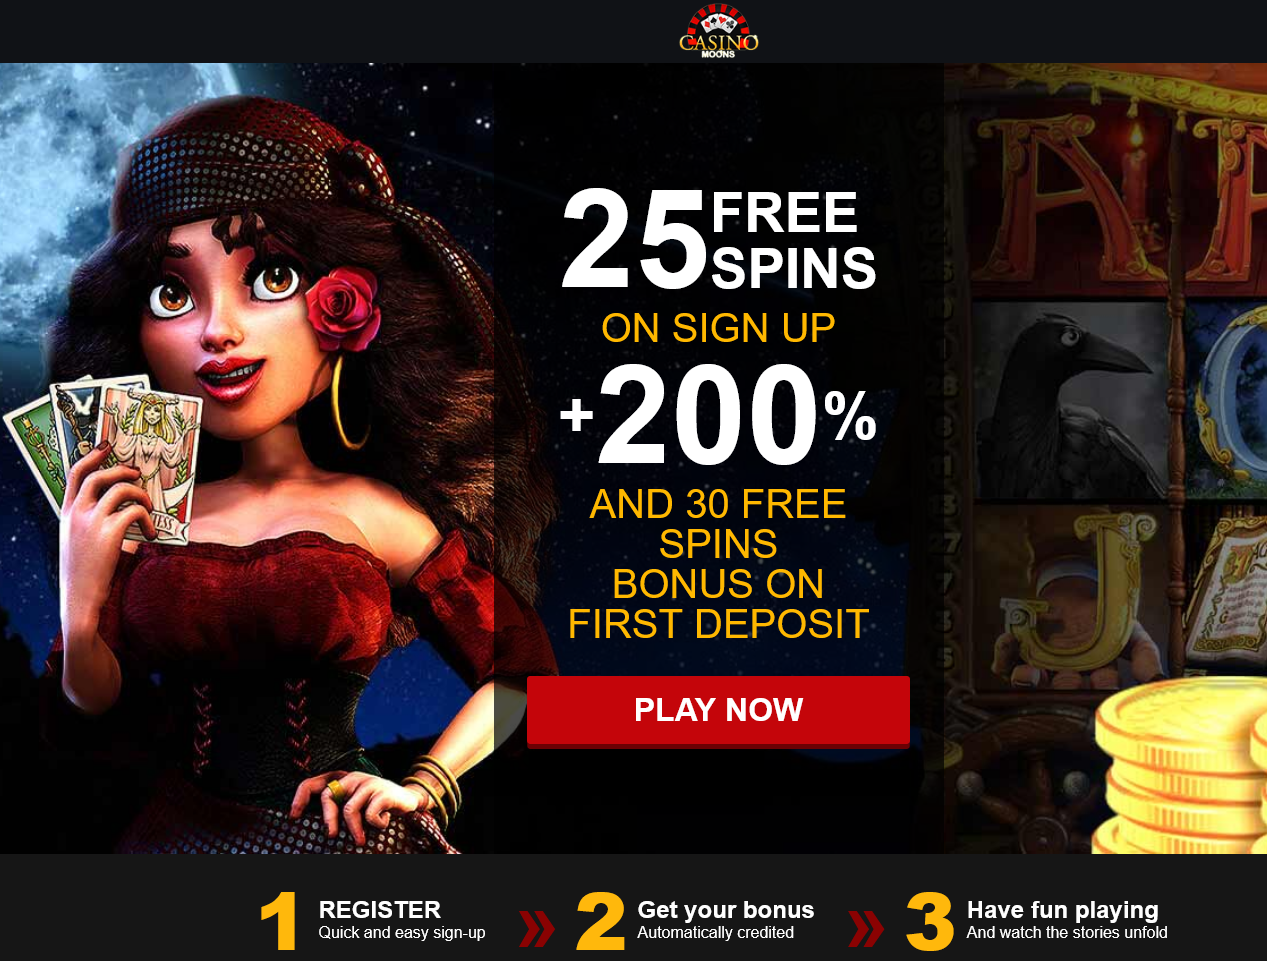 25 FREE
                                SPINS ON SIGN UP